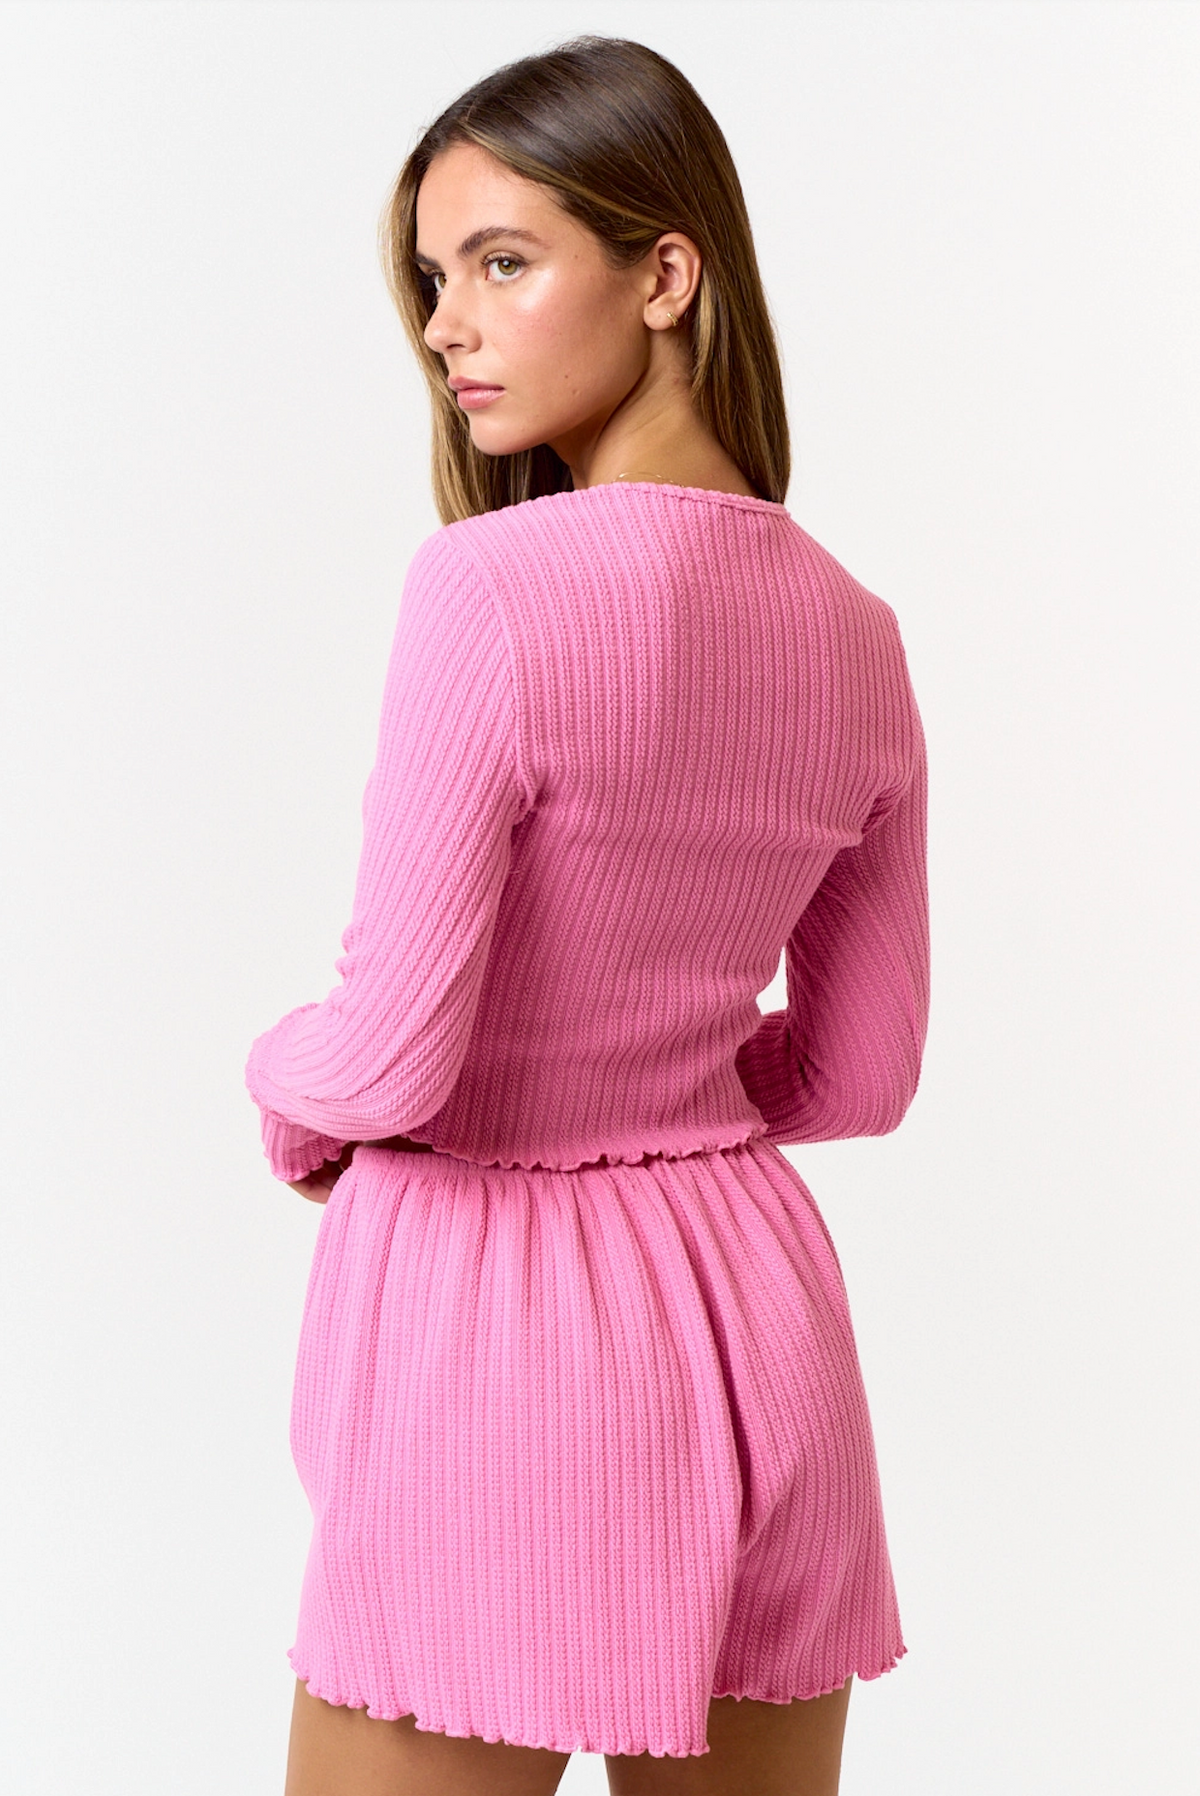 Mollie Pink Bow Lounge Top